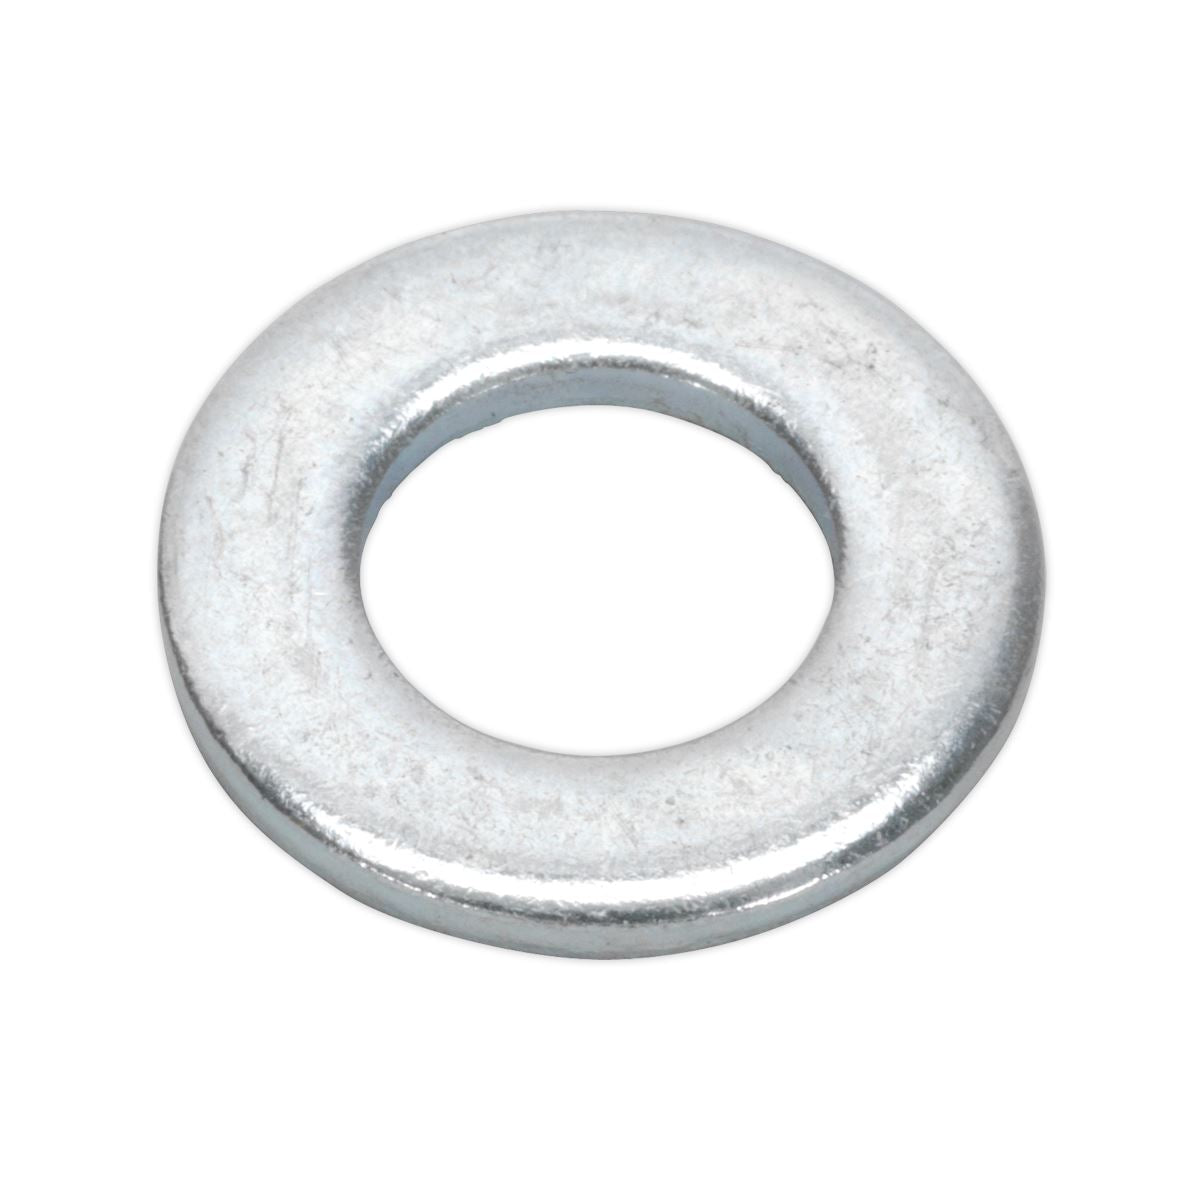 Sealey Flat Washer DIN 125 - M8 x 17mm Form A Zinc Pack of 100